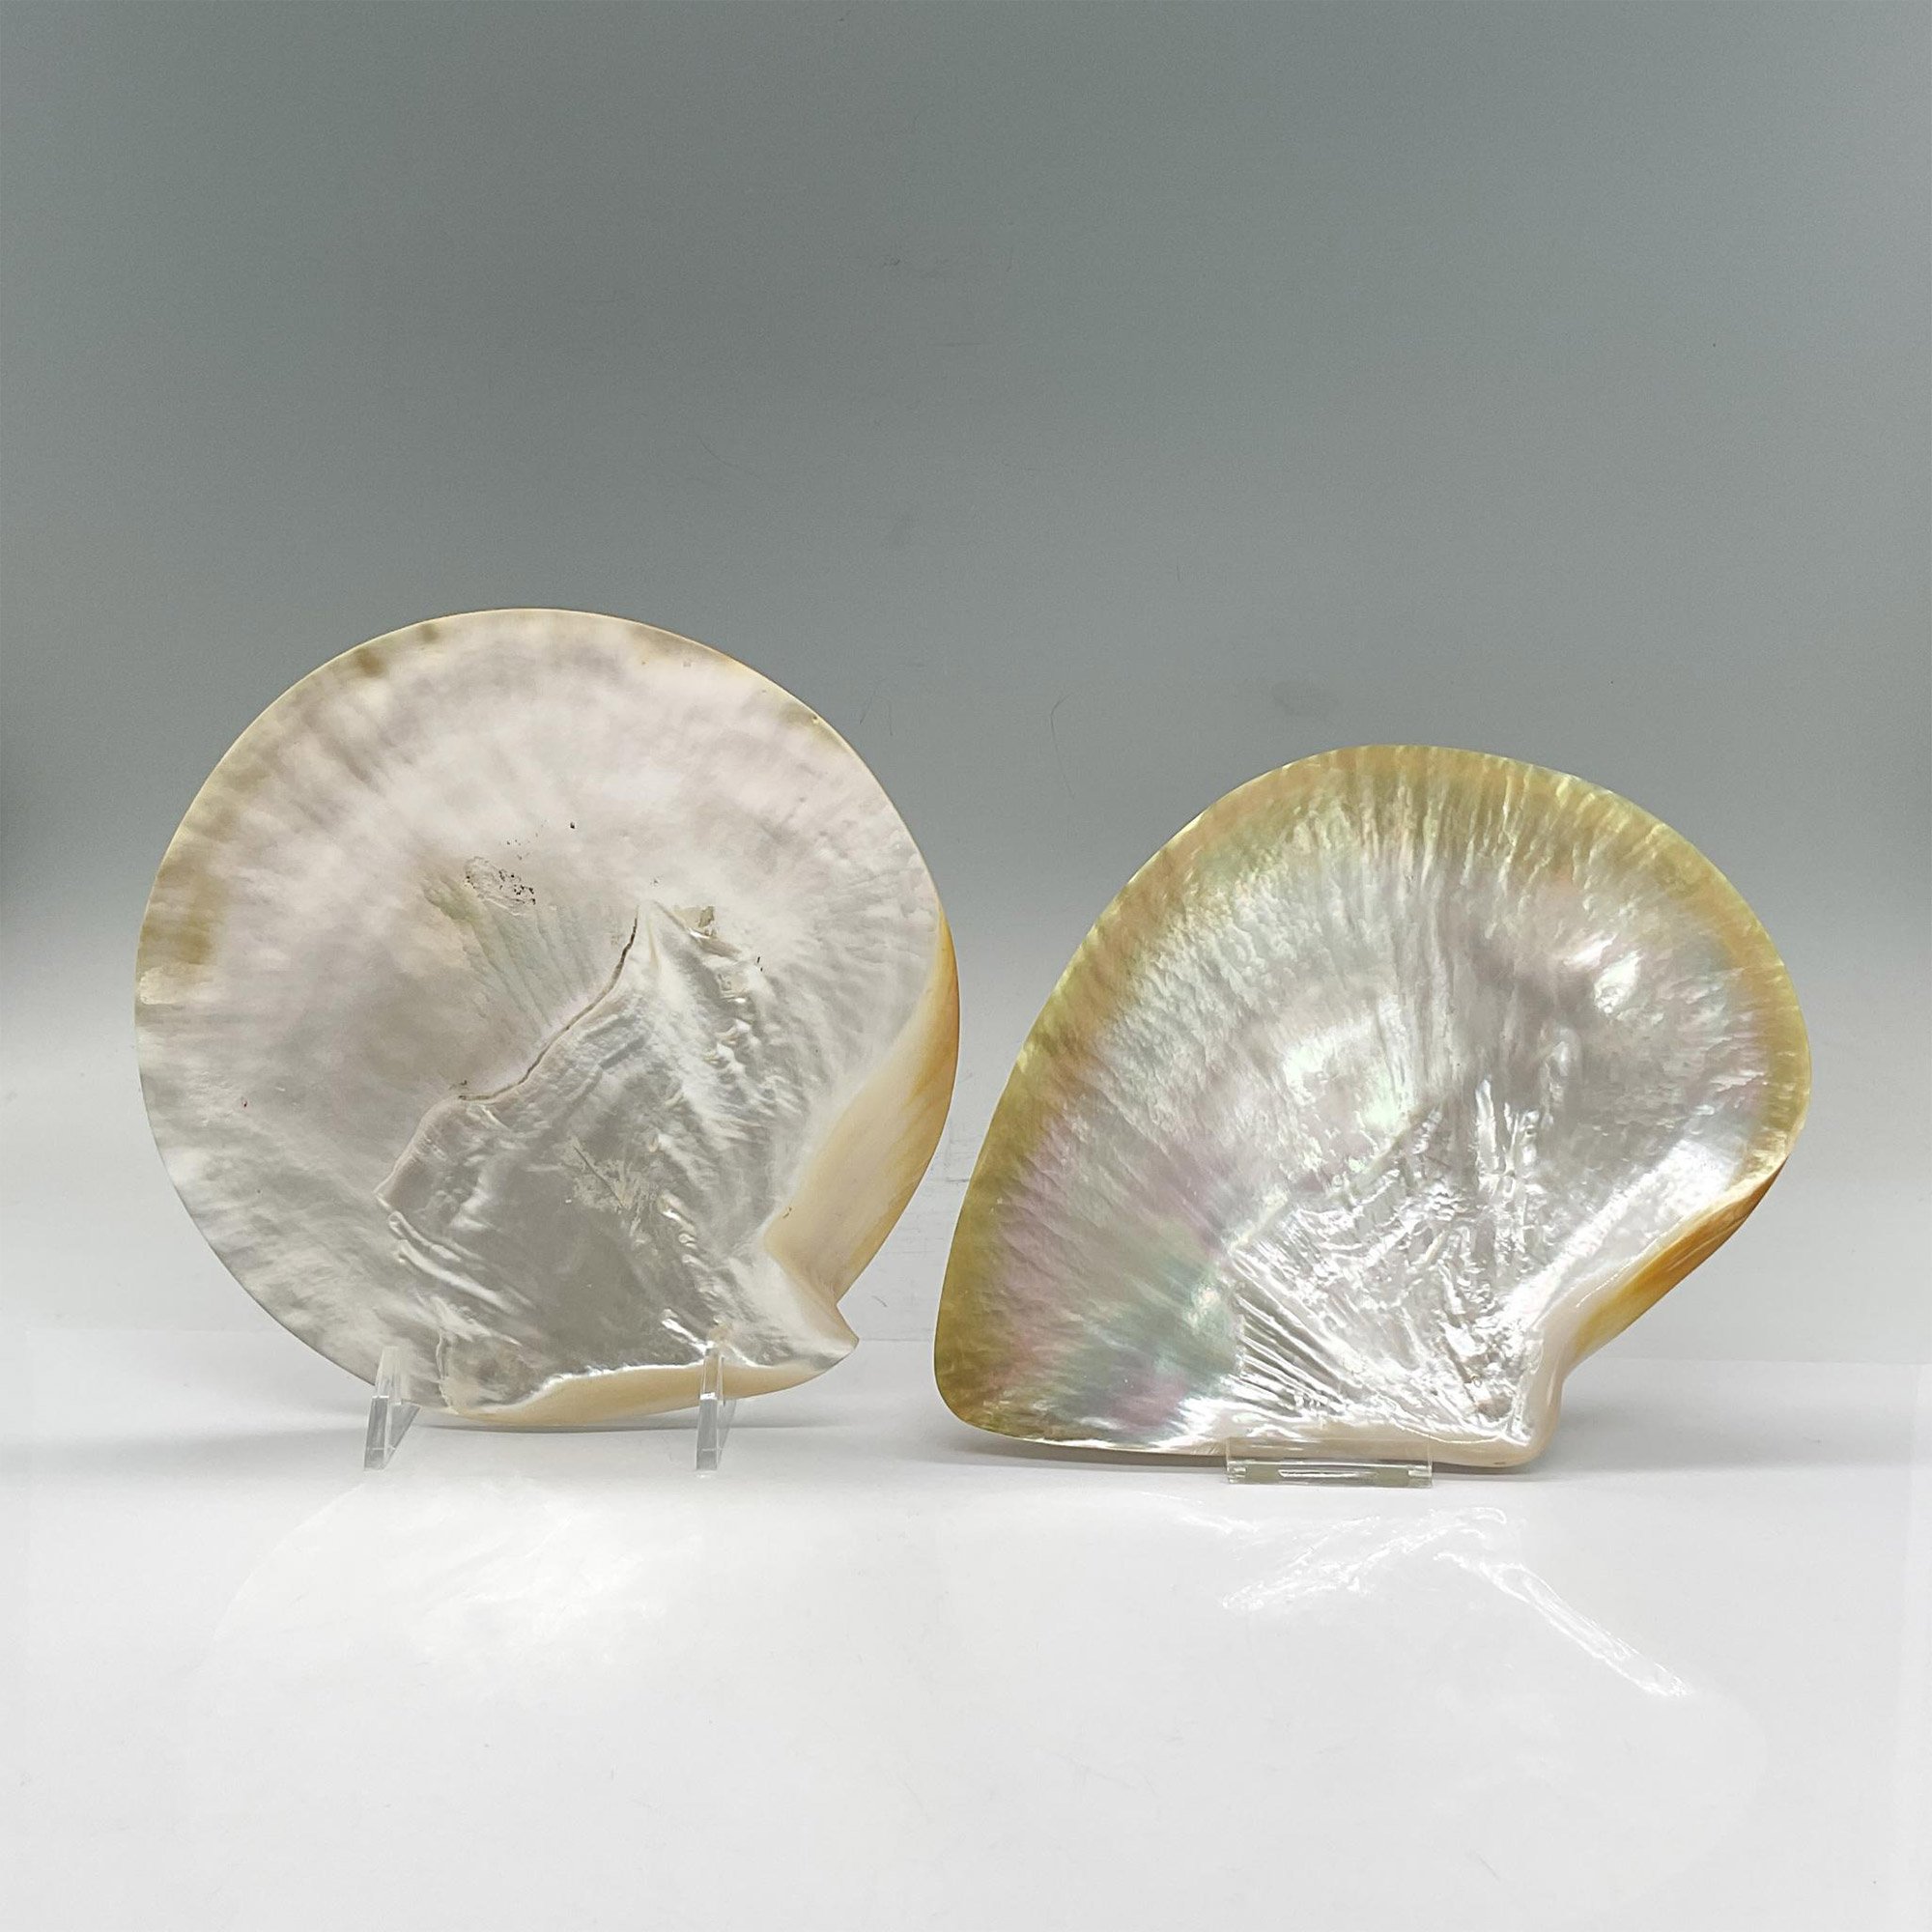 4pc Mother Of Pearl Shell Appetizer Plates - Image 4 of 5